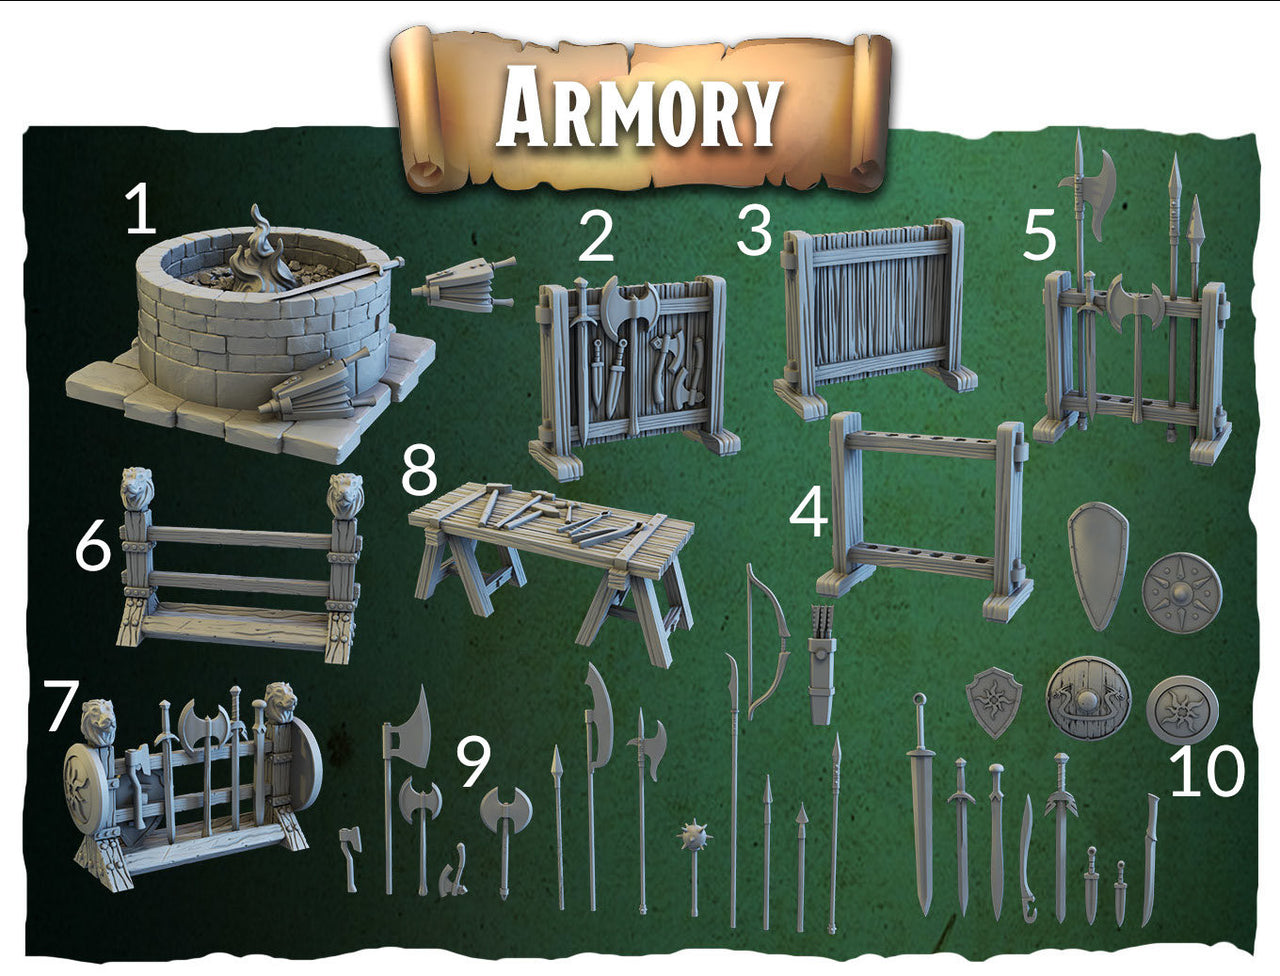 Armory Decor - Crippled God Foundry, Dungeon of Despair | 32mm | Scatter Terrain | Forge | Weapons | Rack | Guardpost